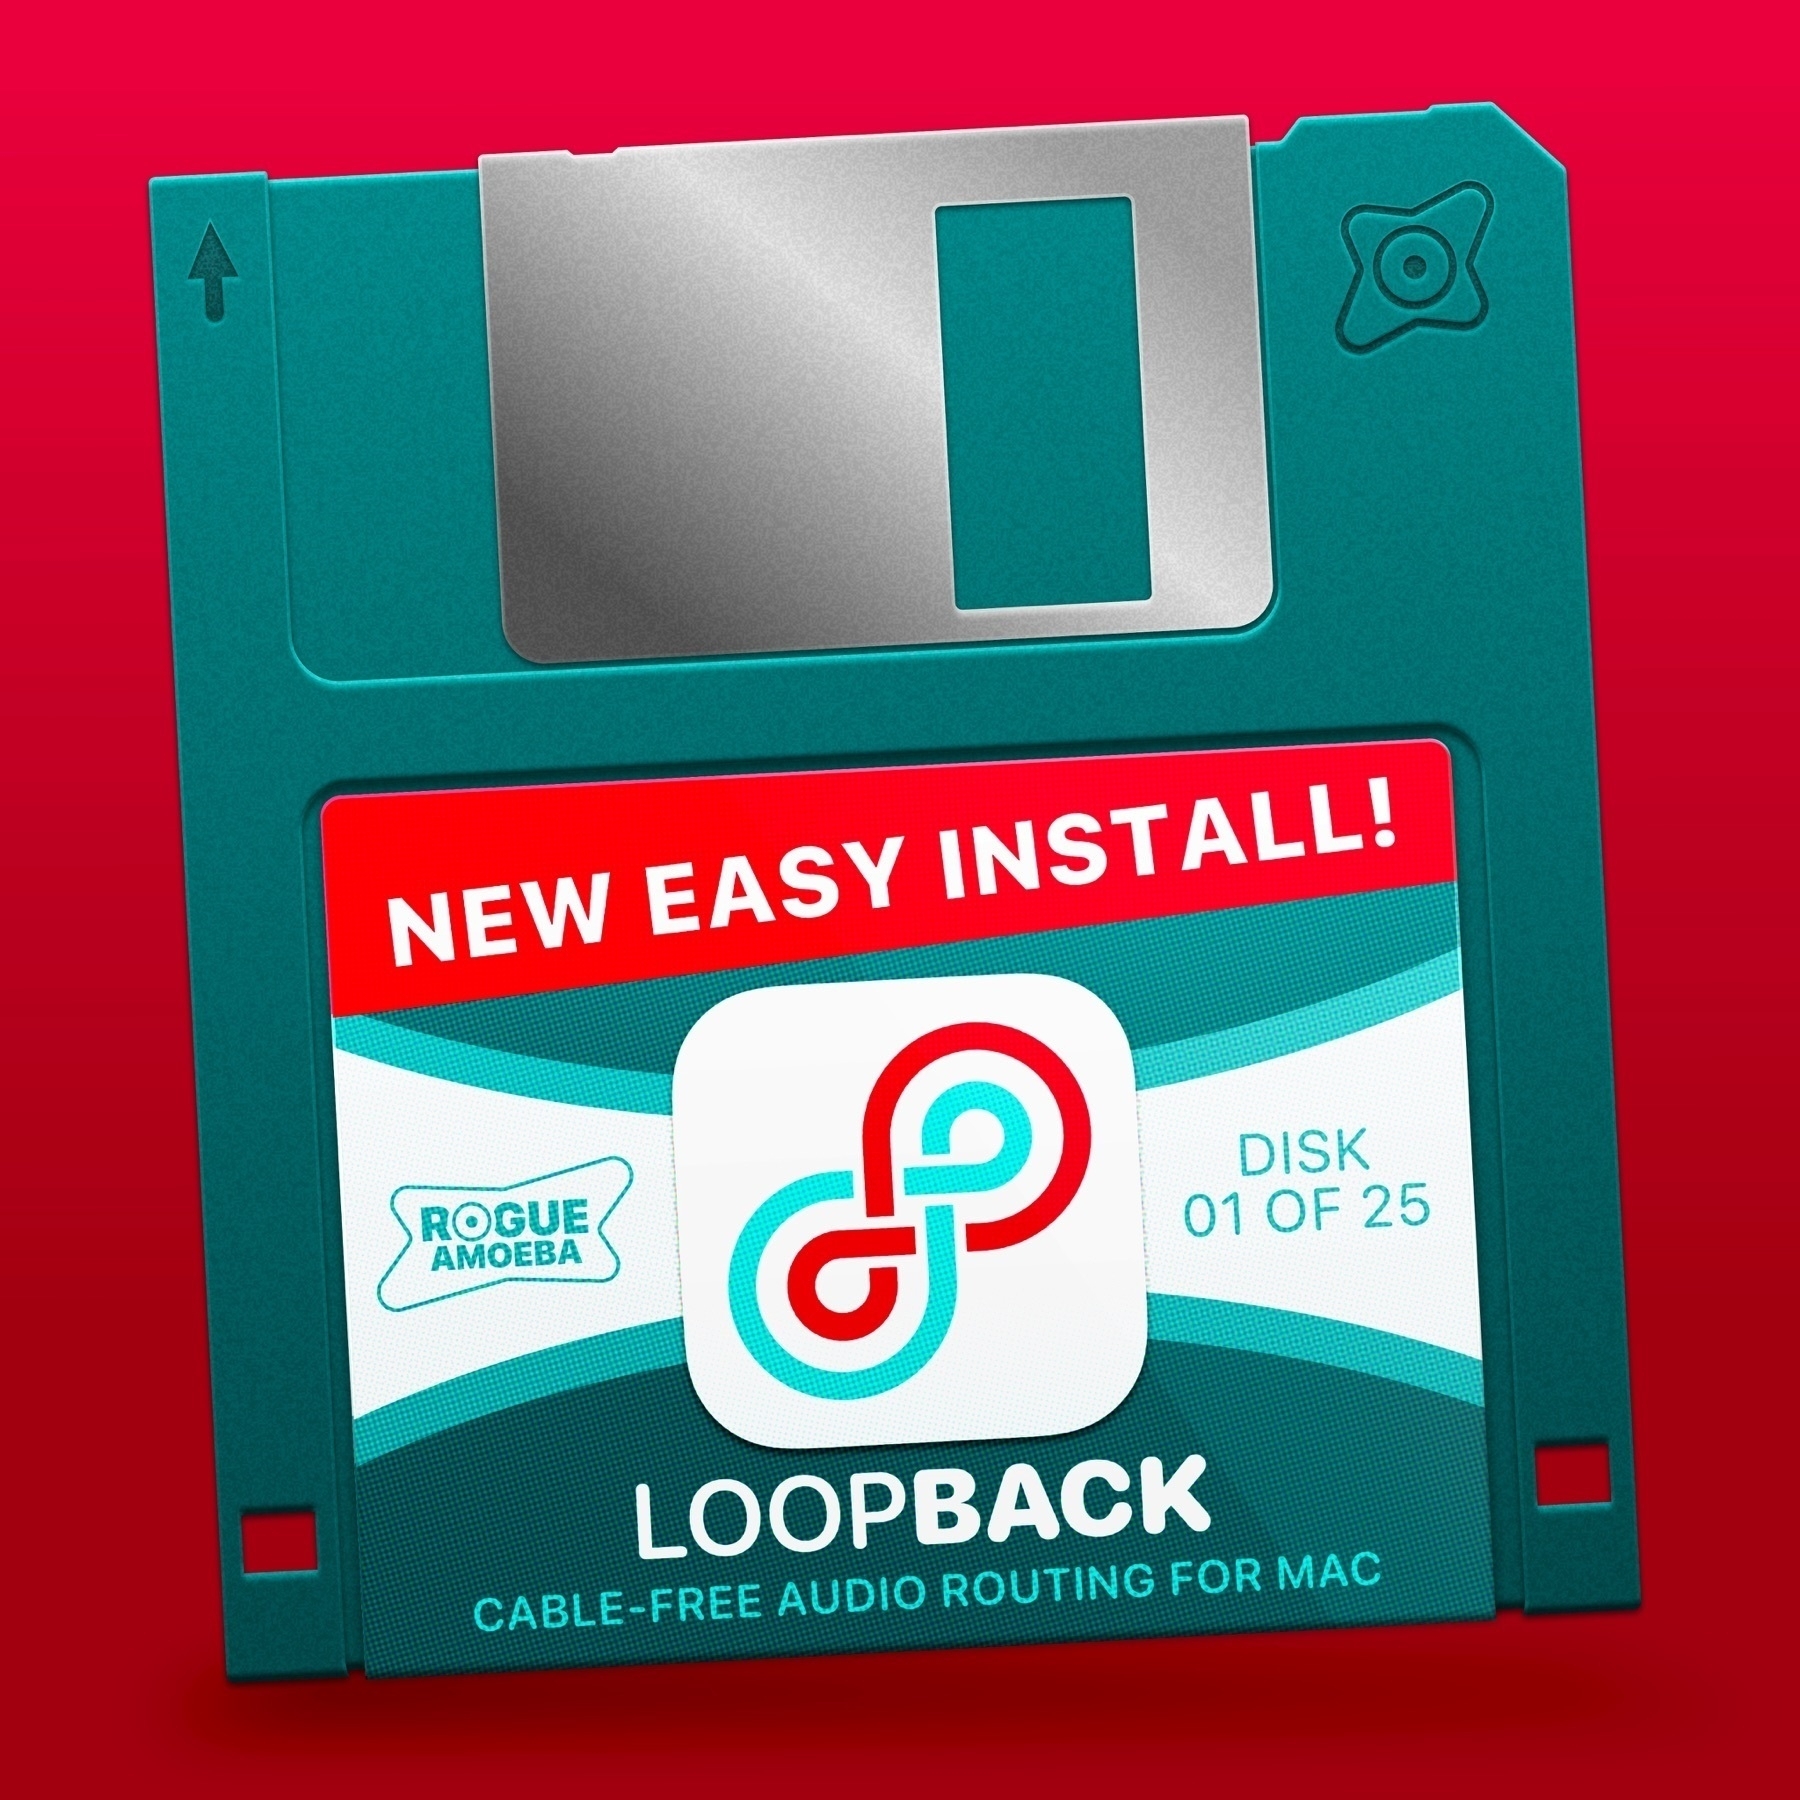 A spoof mockup of 3.25 inch floppy disk to install Loopback.